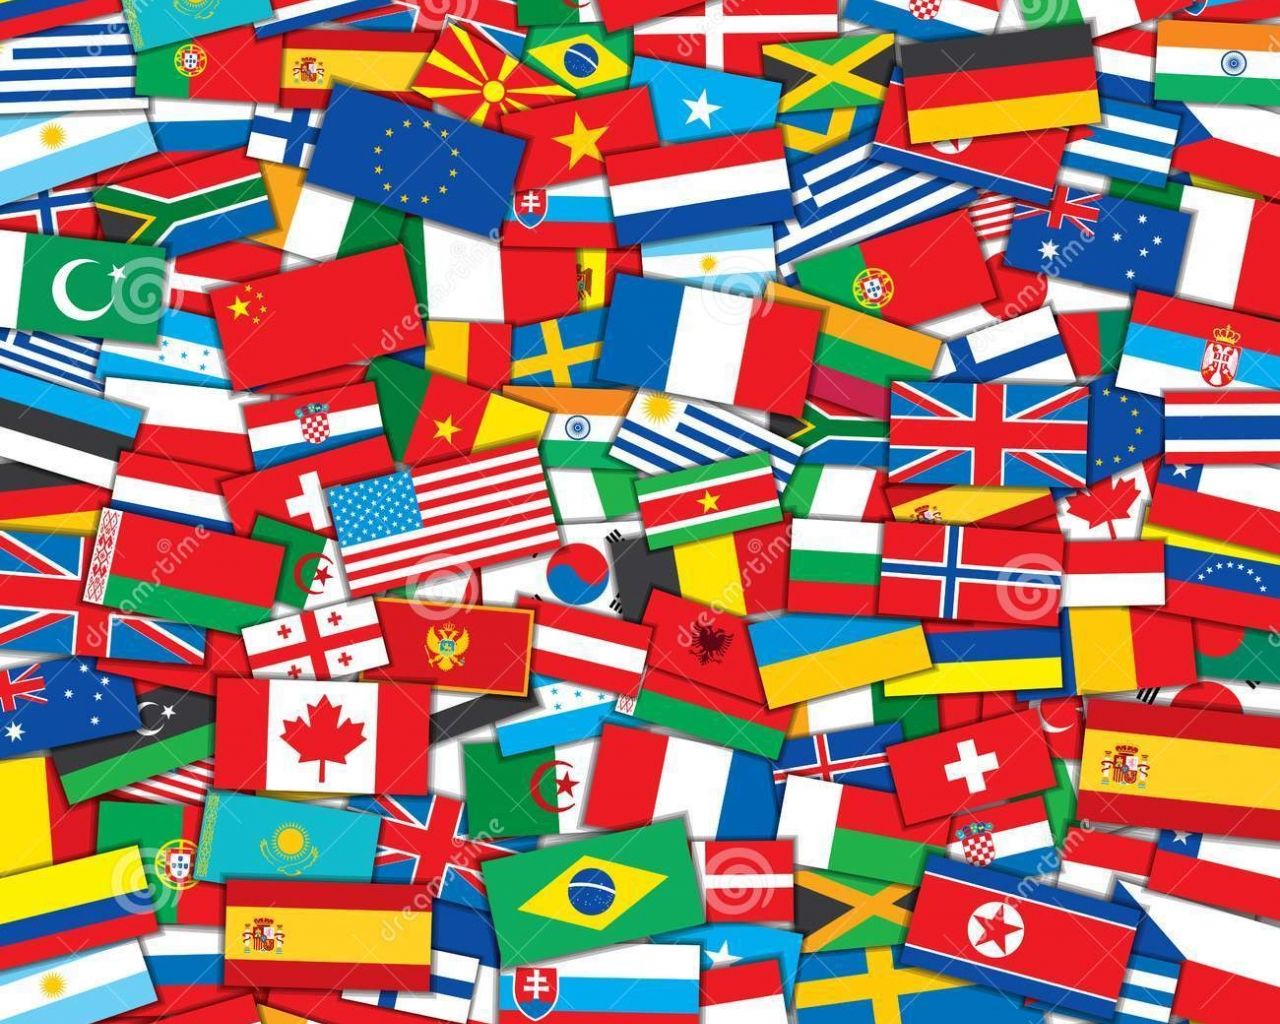 Free download World Flags World flags background [1300x1390] for your Desktop, Mobile & Tablet. Explore World Flags Wallpaper. Flag Background Wallpaper, HD Flag Wallpaper, Flag Desktop Wallpaper